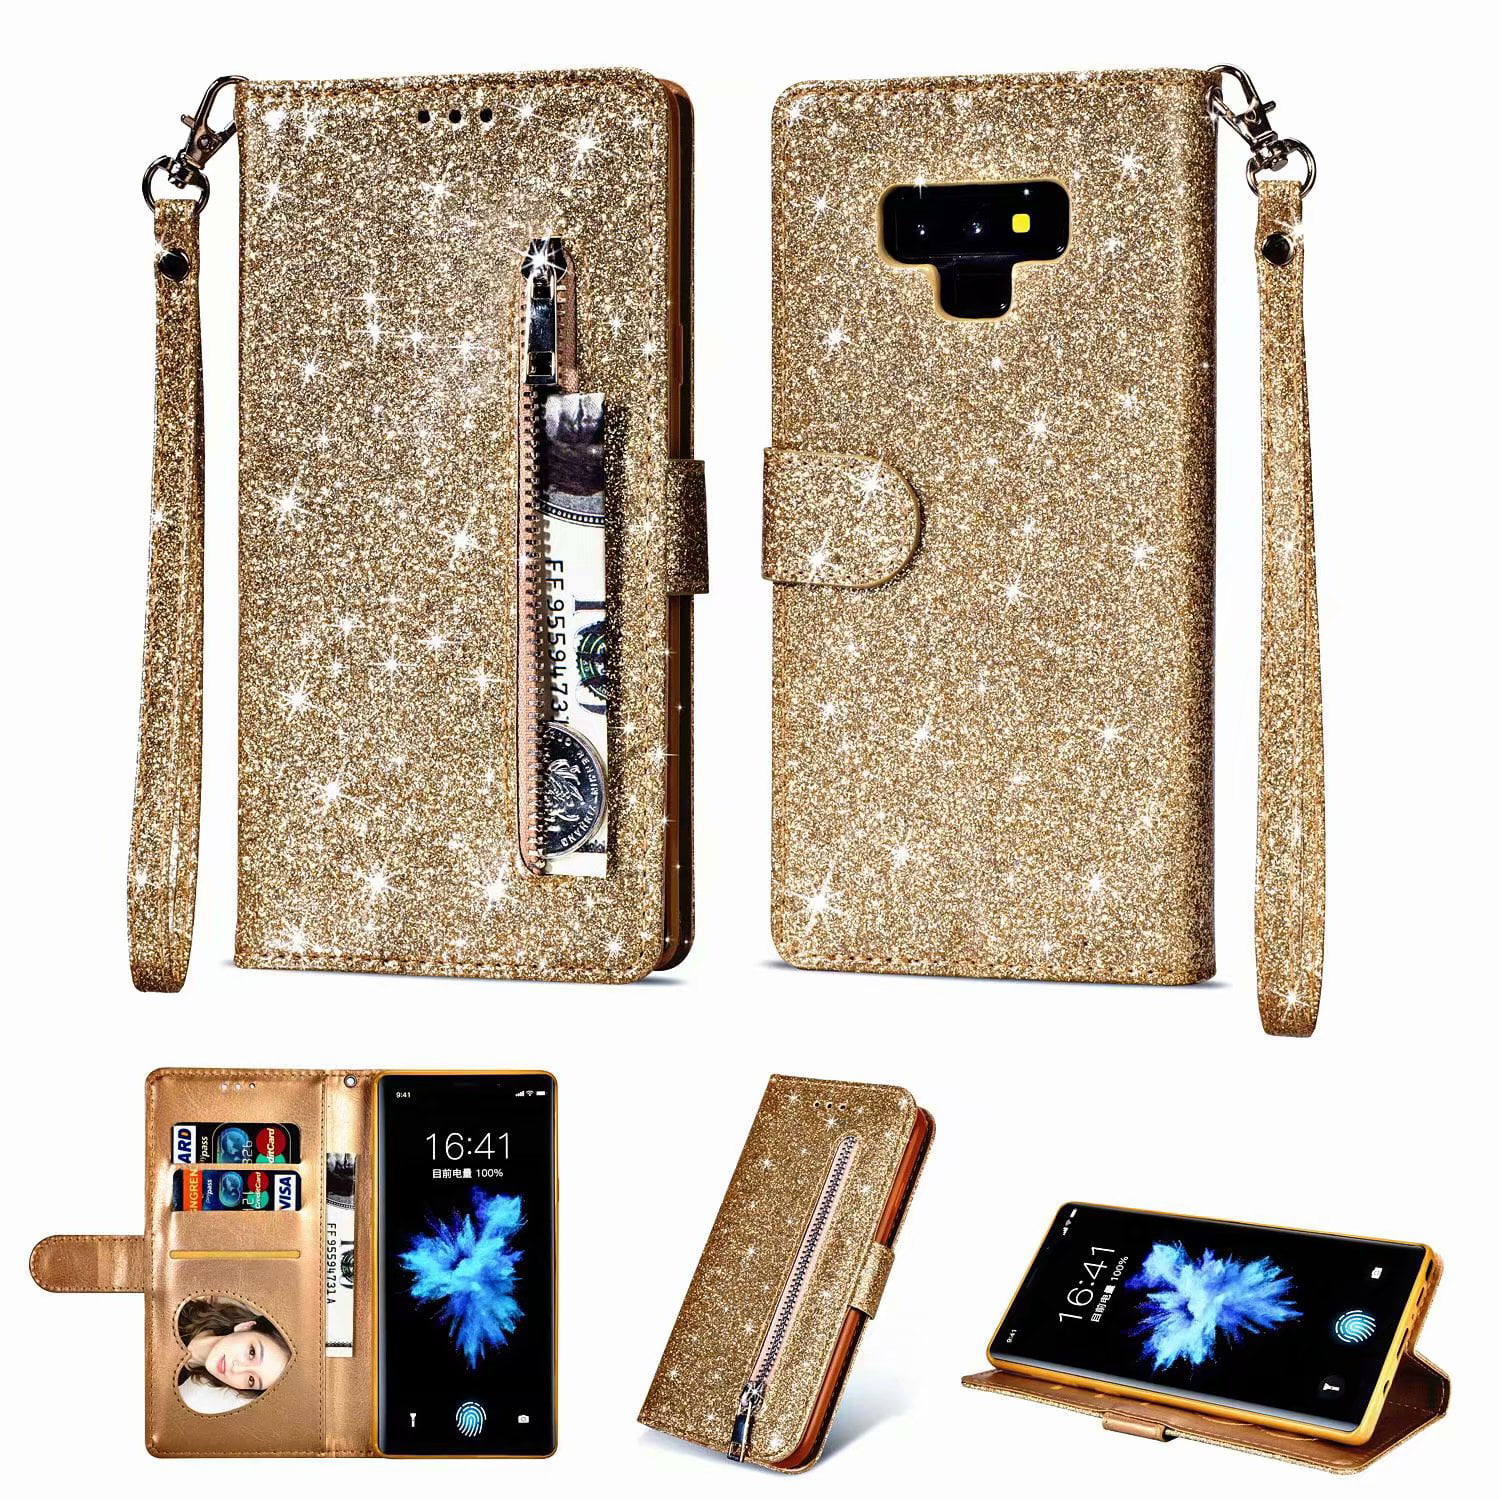 Folio Style 6.4 , Khaki Samsung Galaxy Note 9 Samsung Galaxy Note 9 Leather Wallet Case by BENIMIL Protective Cover Card Slot + Money Pocket Stand Feature